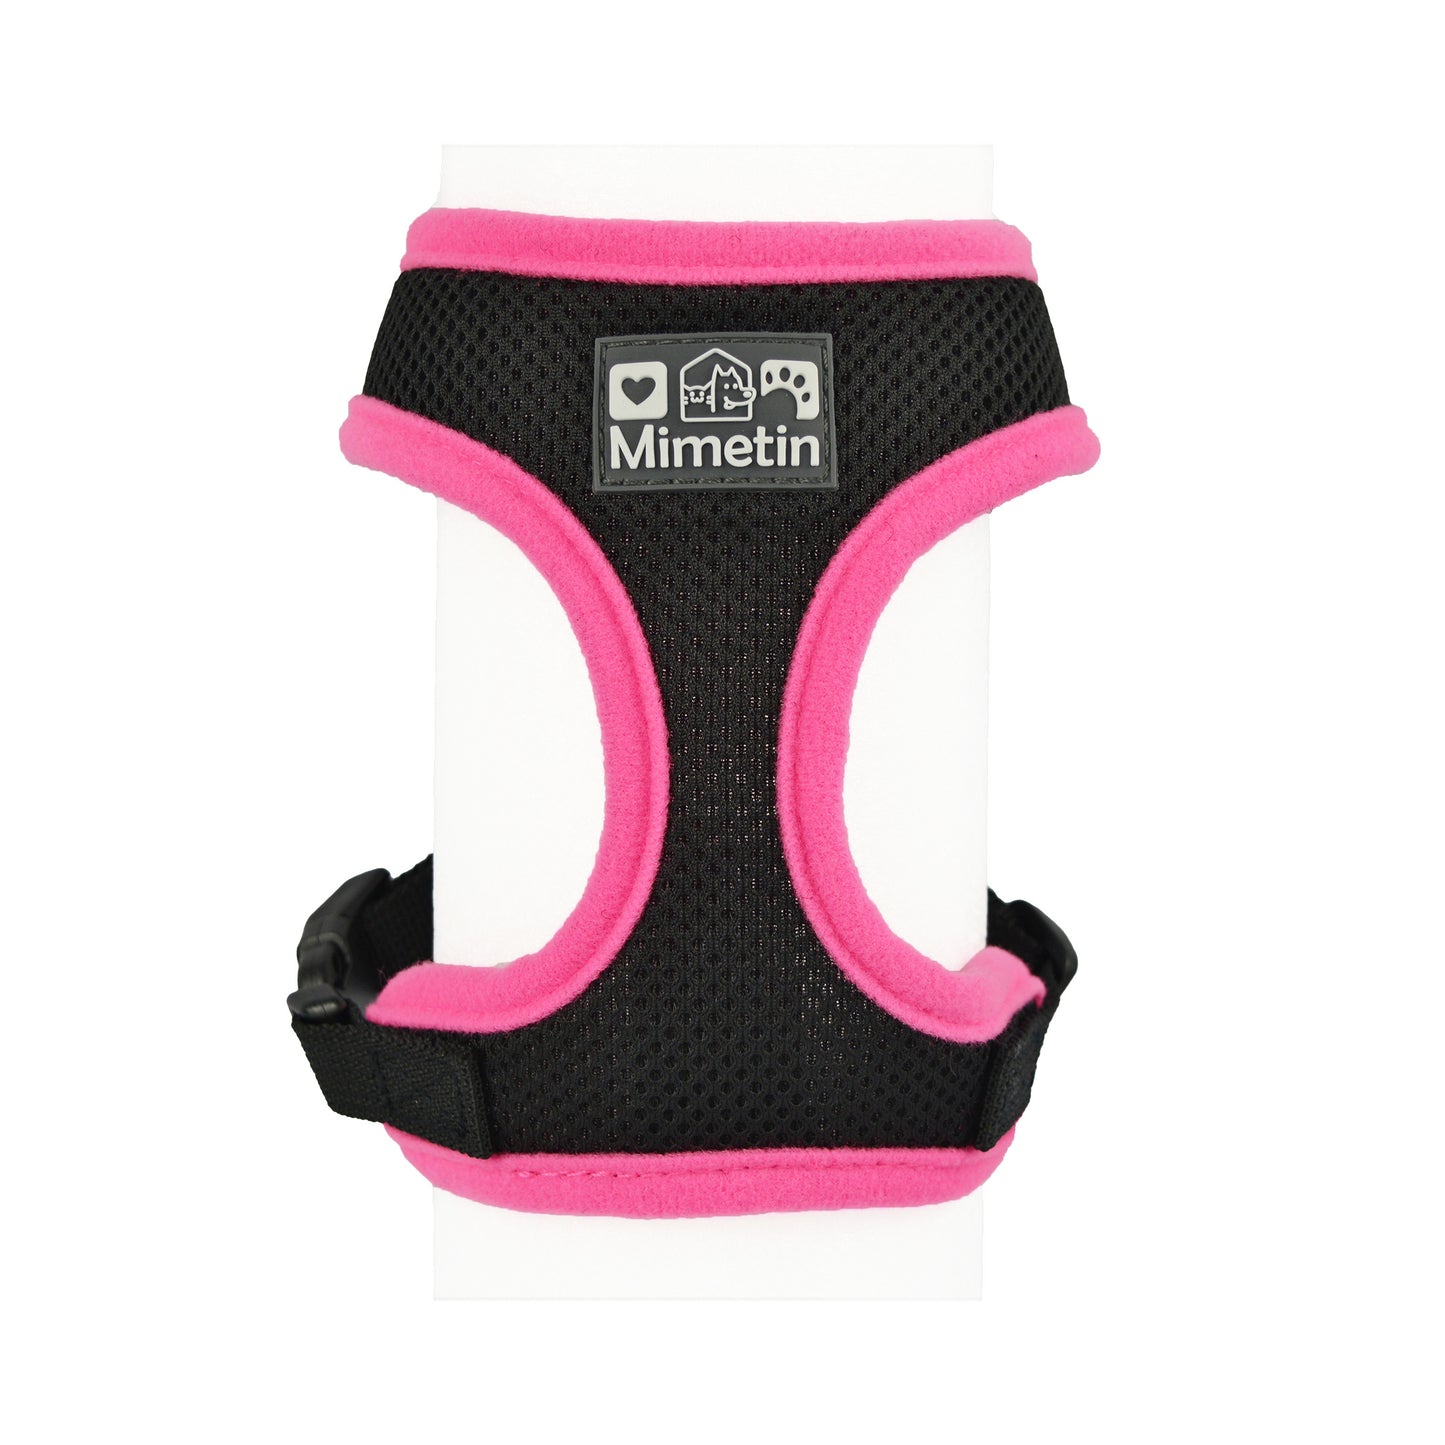 Mimetin Soft Pet Harness with Leash Adjustable Walking Pet Harness, Pink, S (14" to 19" Chest Size) 2 Piece Set